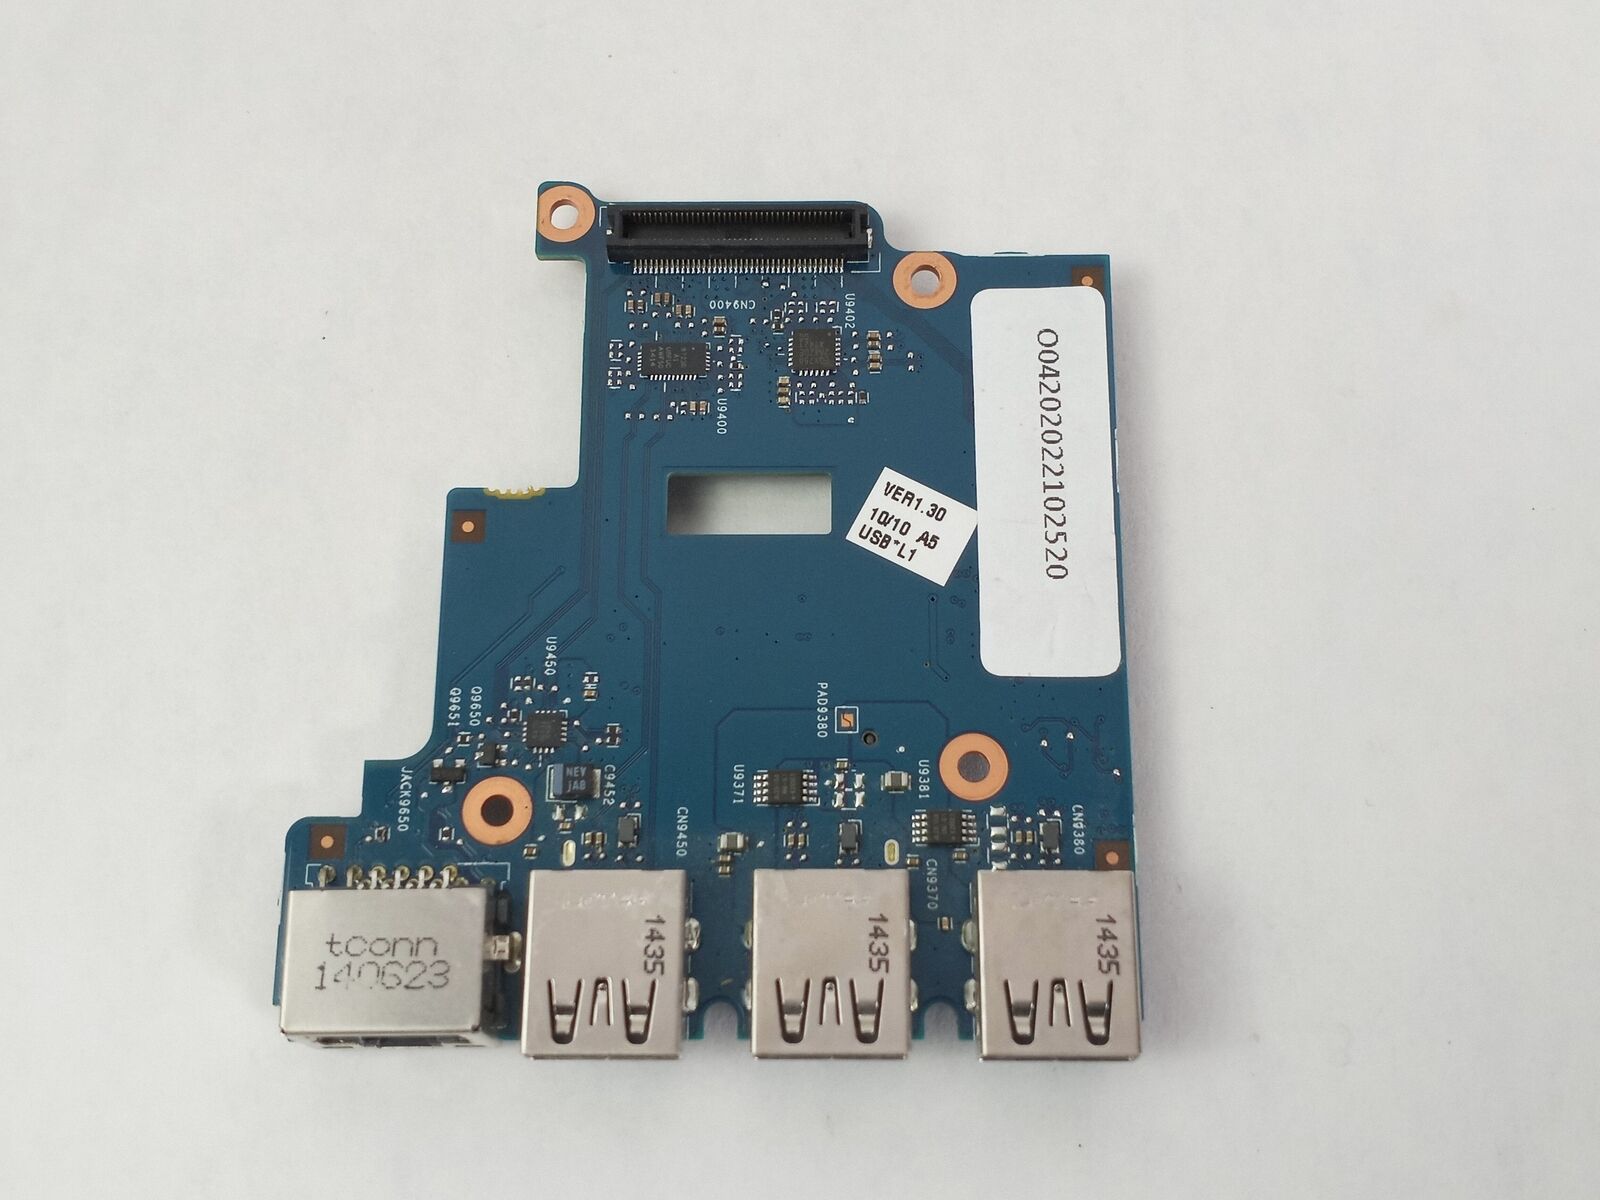 Lot of 5 HP 6050A2566801 Laptop Daughter Card for ProBook 655 G1